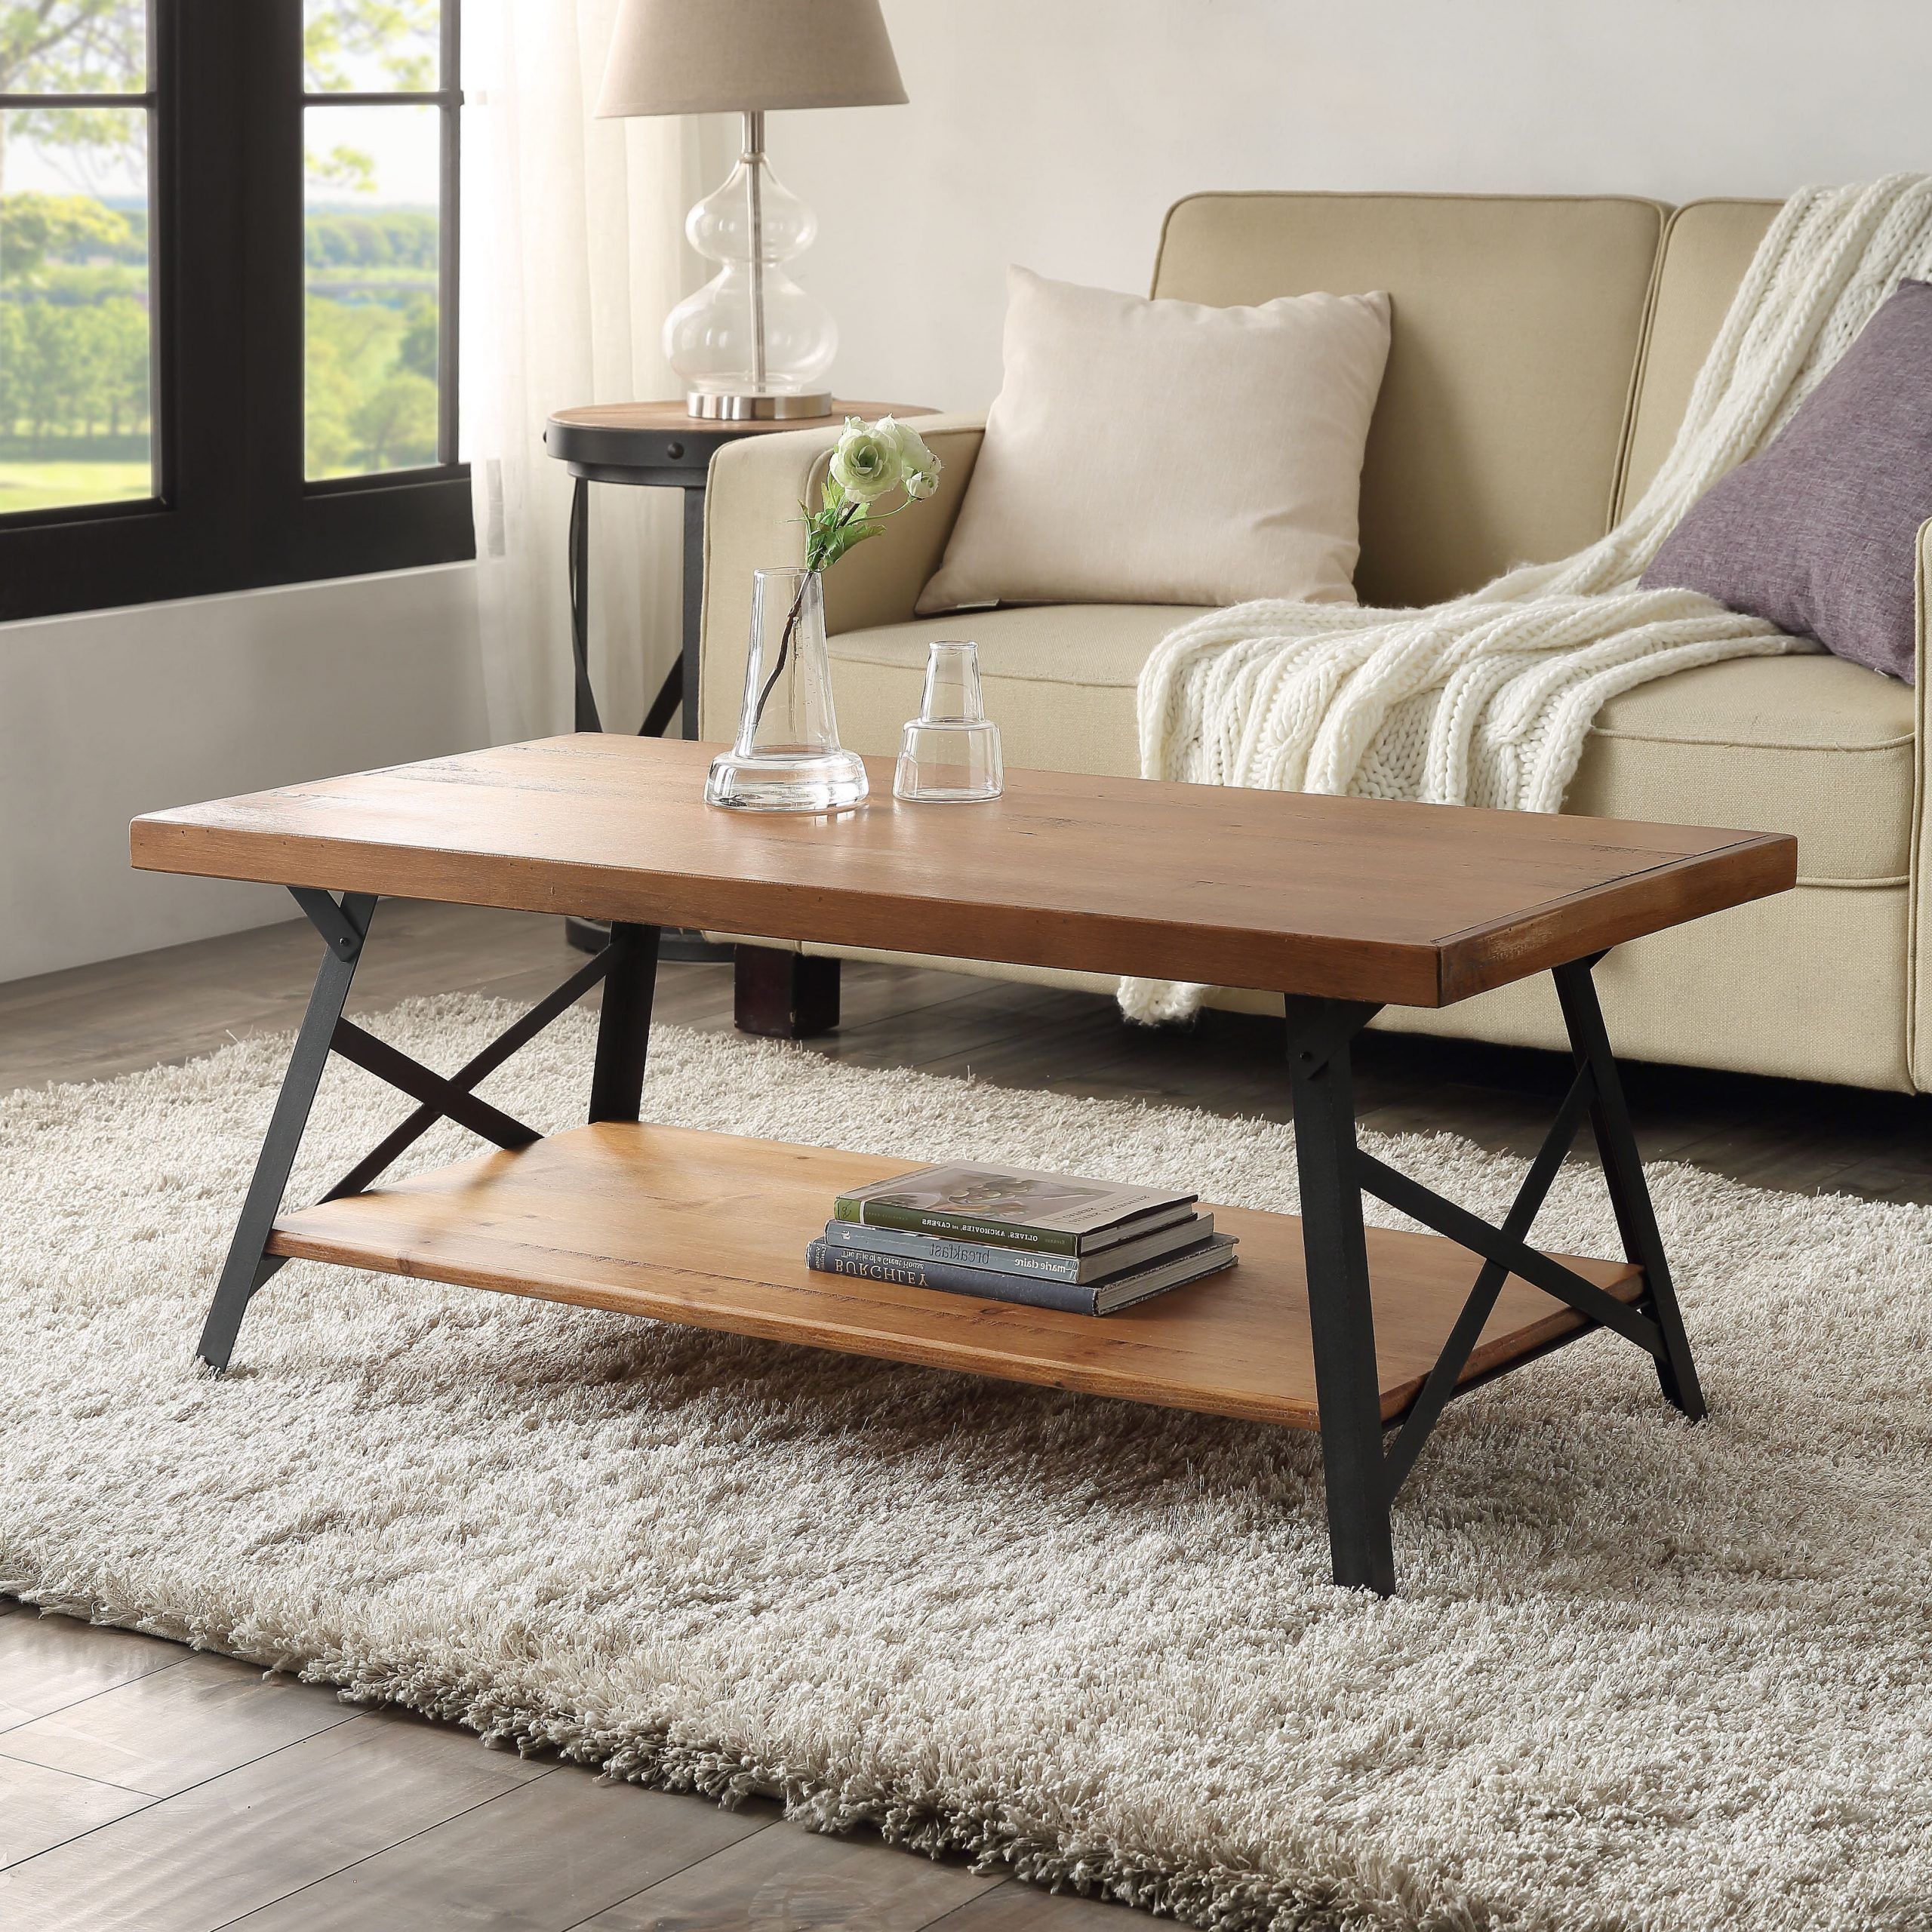 Well Known Iron Legs Coffee Tables With Regard To Gracie Oaks 43'' Metal Legs Rustic Coffee Table, Solid Wood Tabletop (View 5 of 20)